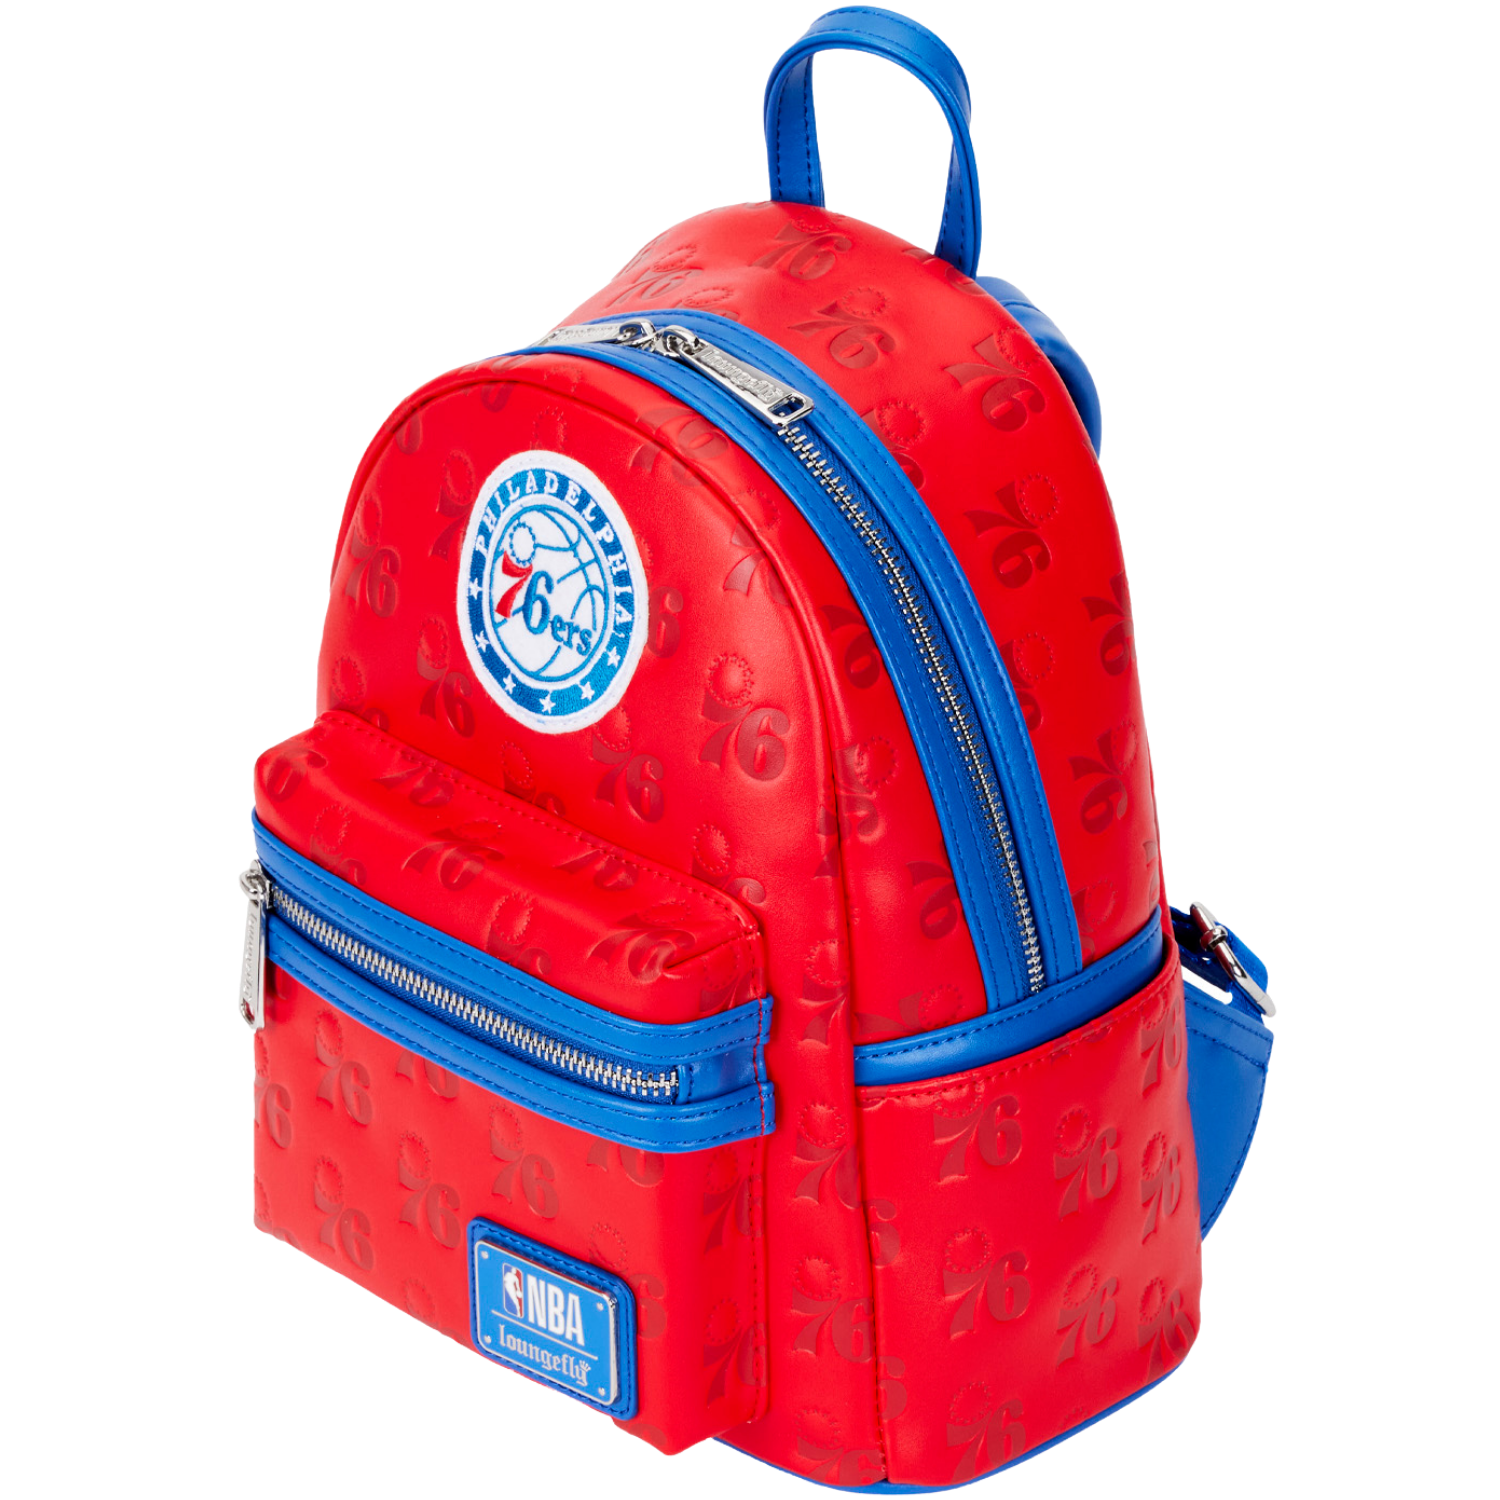 Loungefly NBA Philly 76ers Debossed Logo Mini Backpack